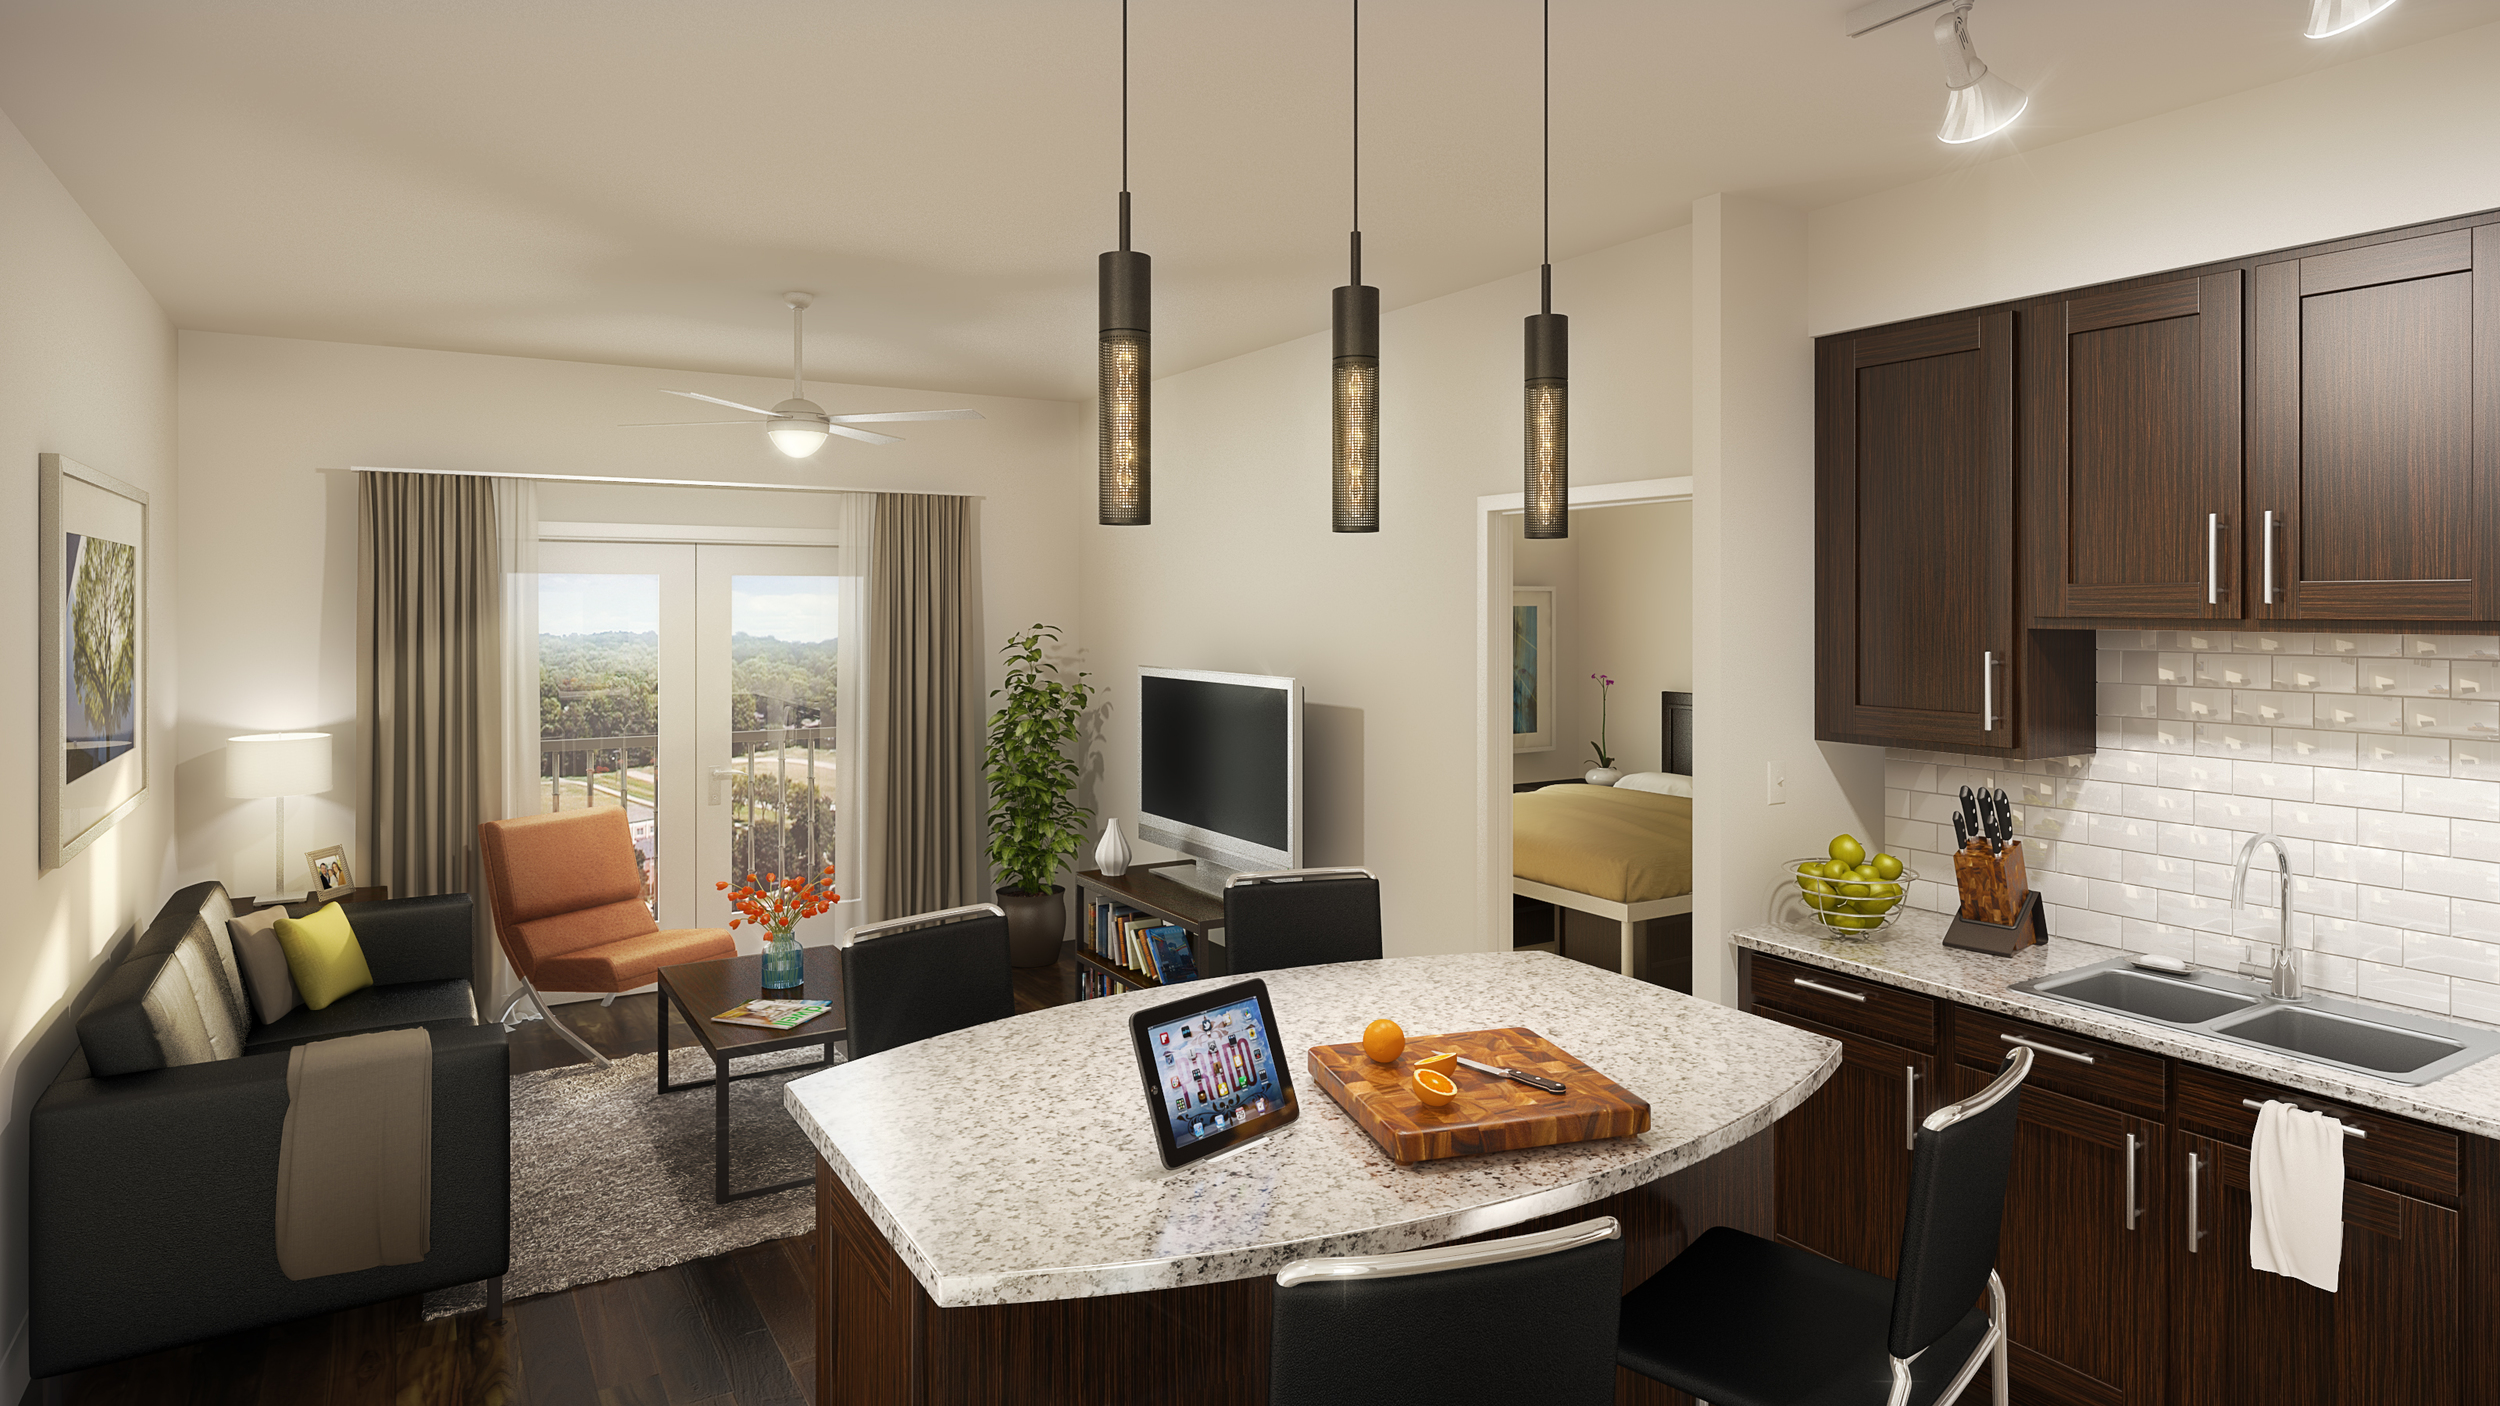  TYPICAL UNIT INTERIOR  rendering by cagleart.com 